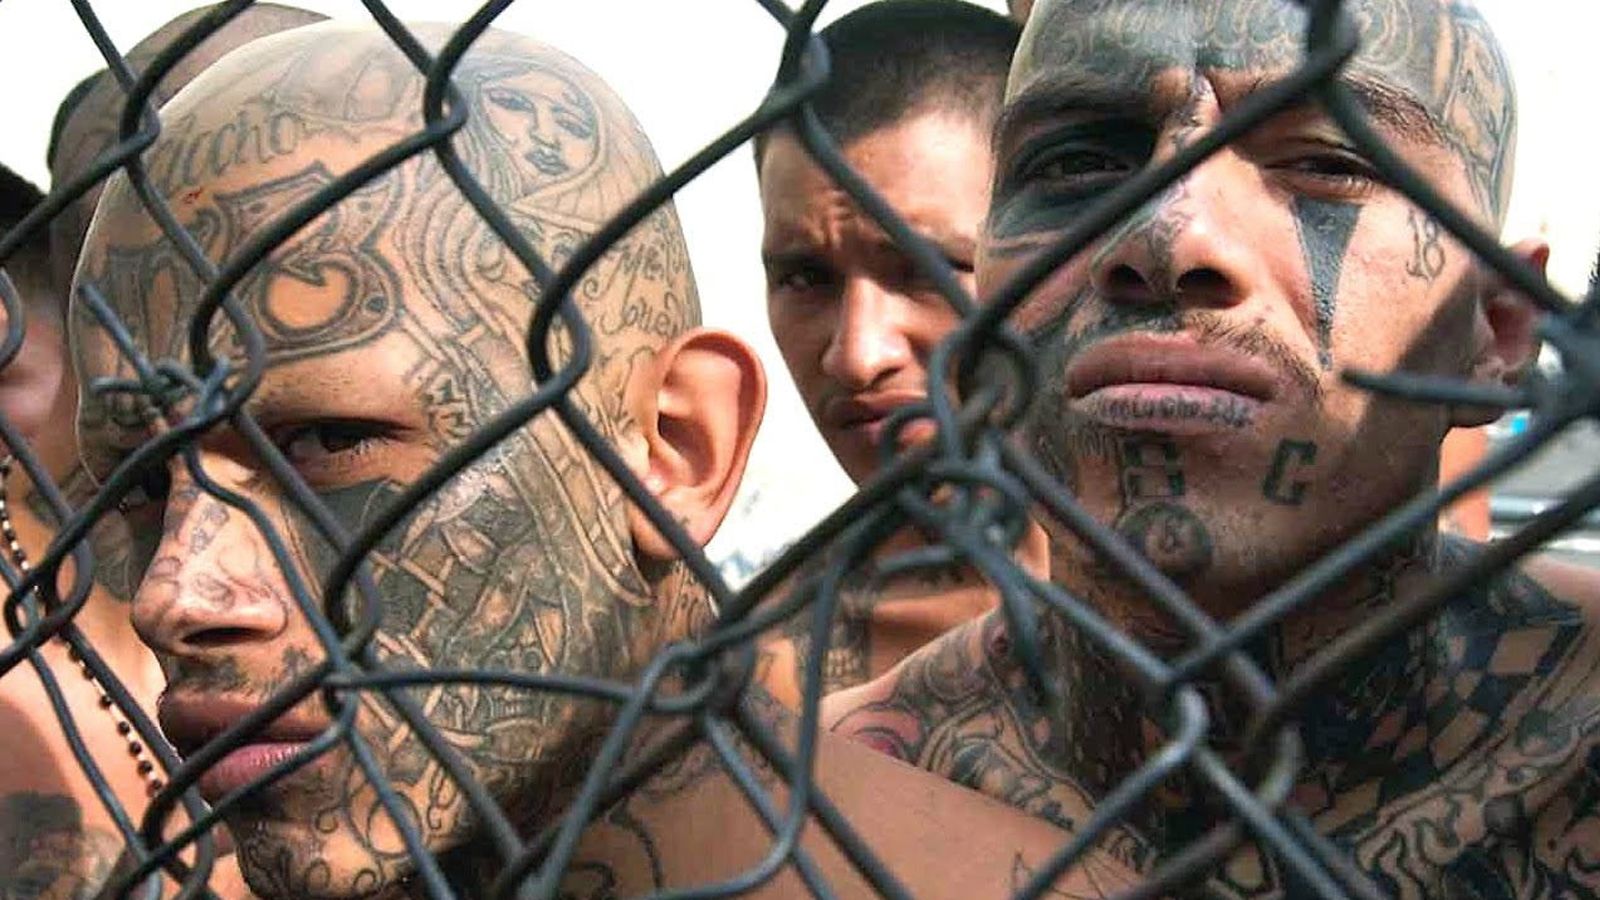 The most dangerous gangs in the world - #Top7 - Steemit.